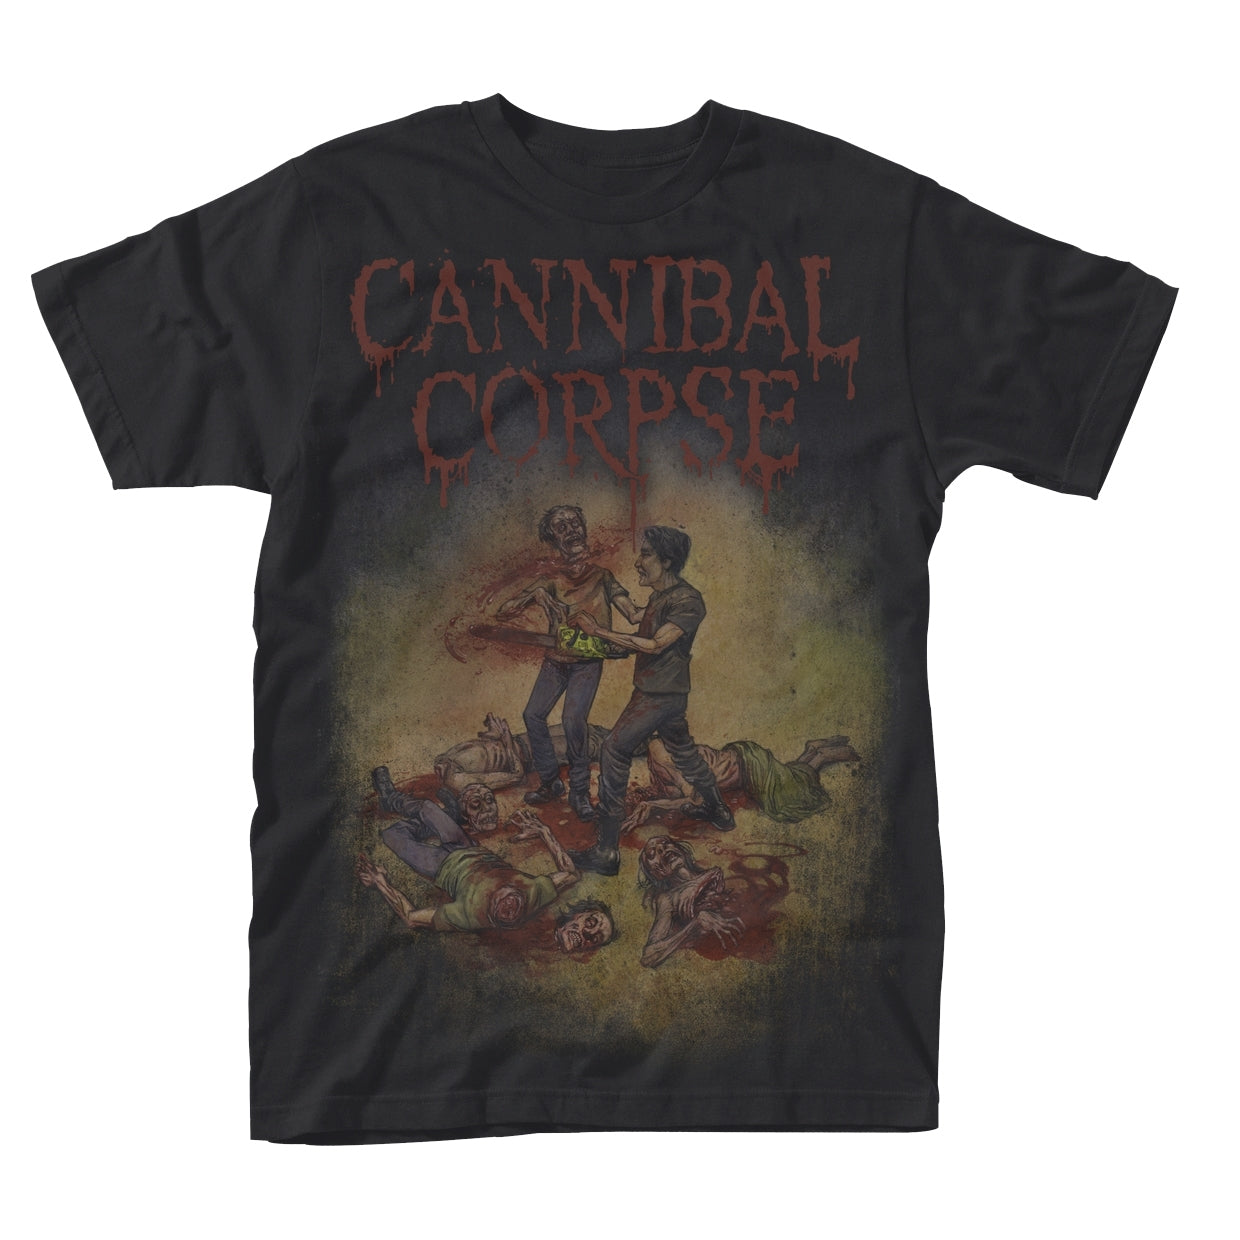 Cannibal Corpse "Chainsaw" T shirt